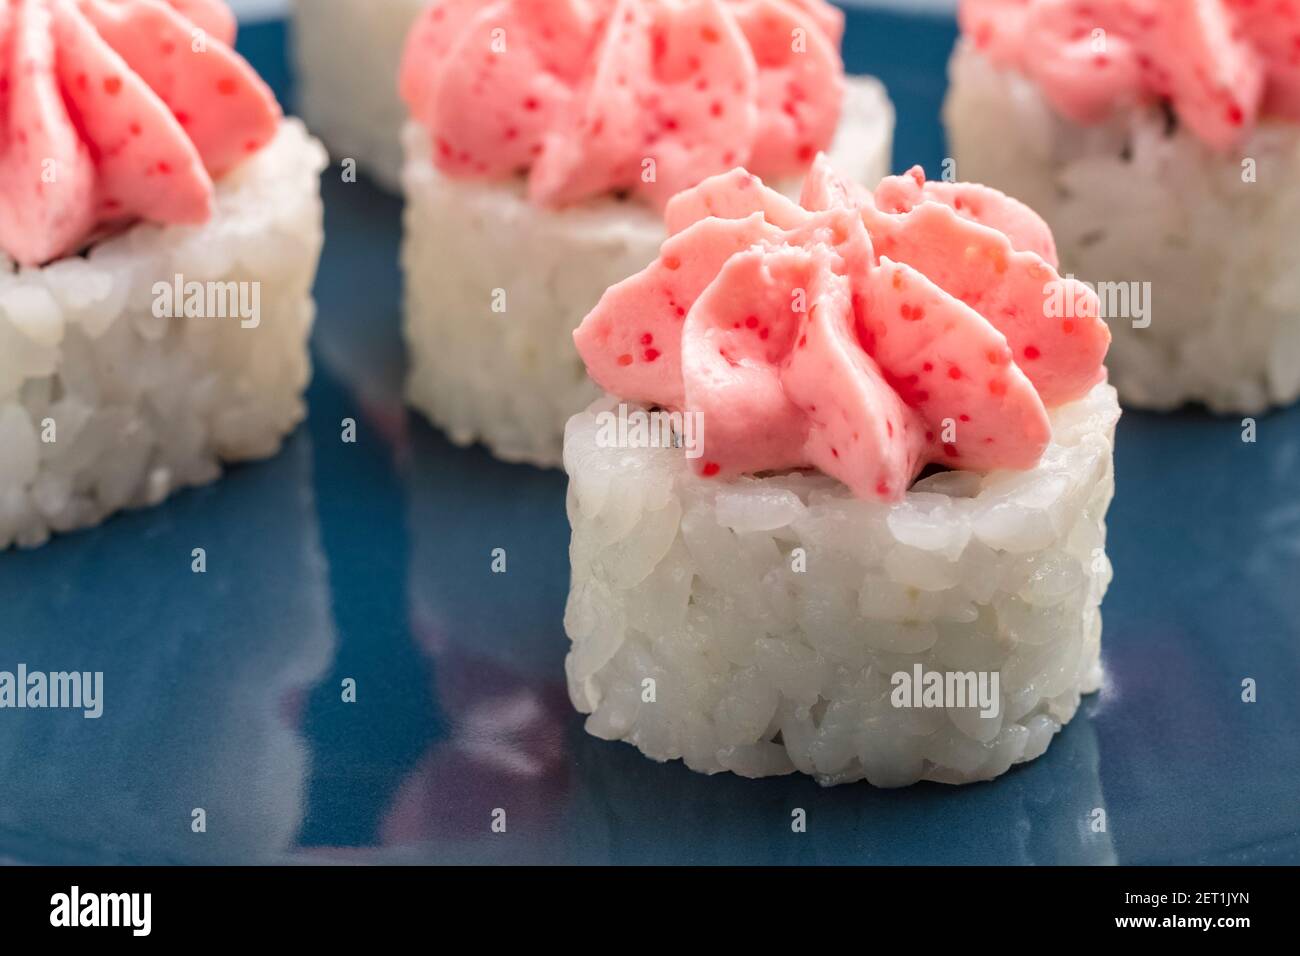 rolls on a blue plate. Serving Japanese food Stock Photo